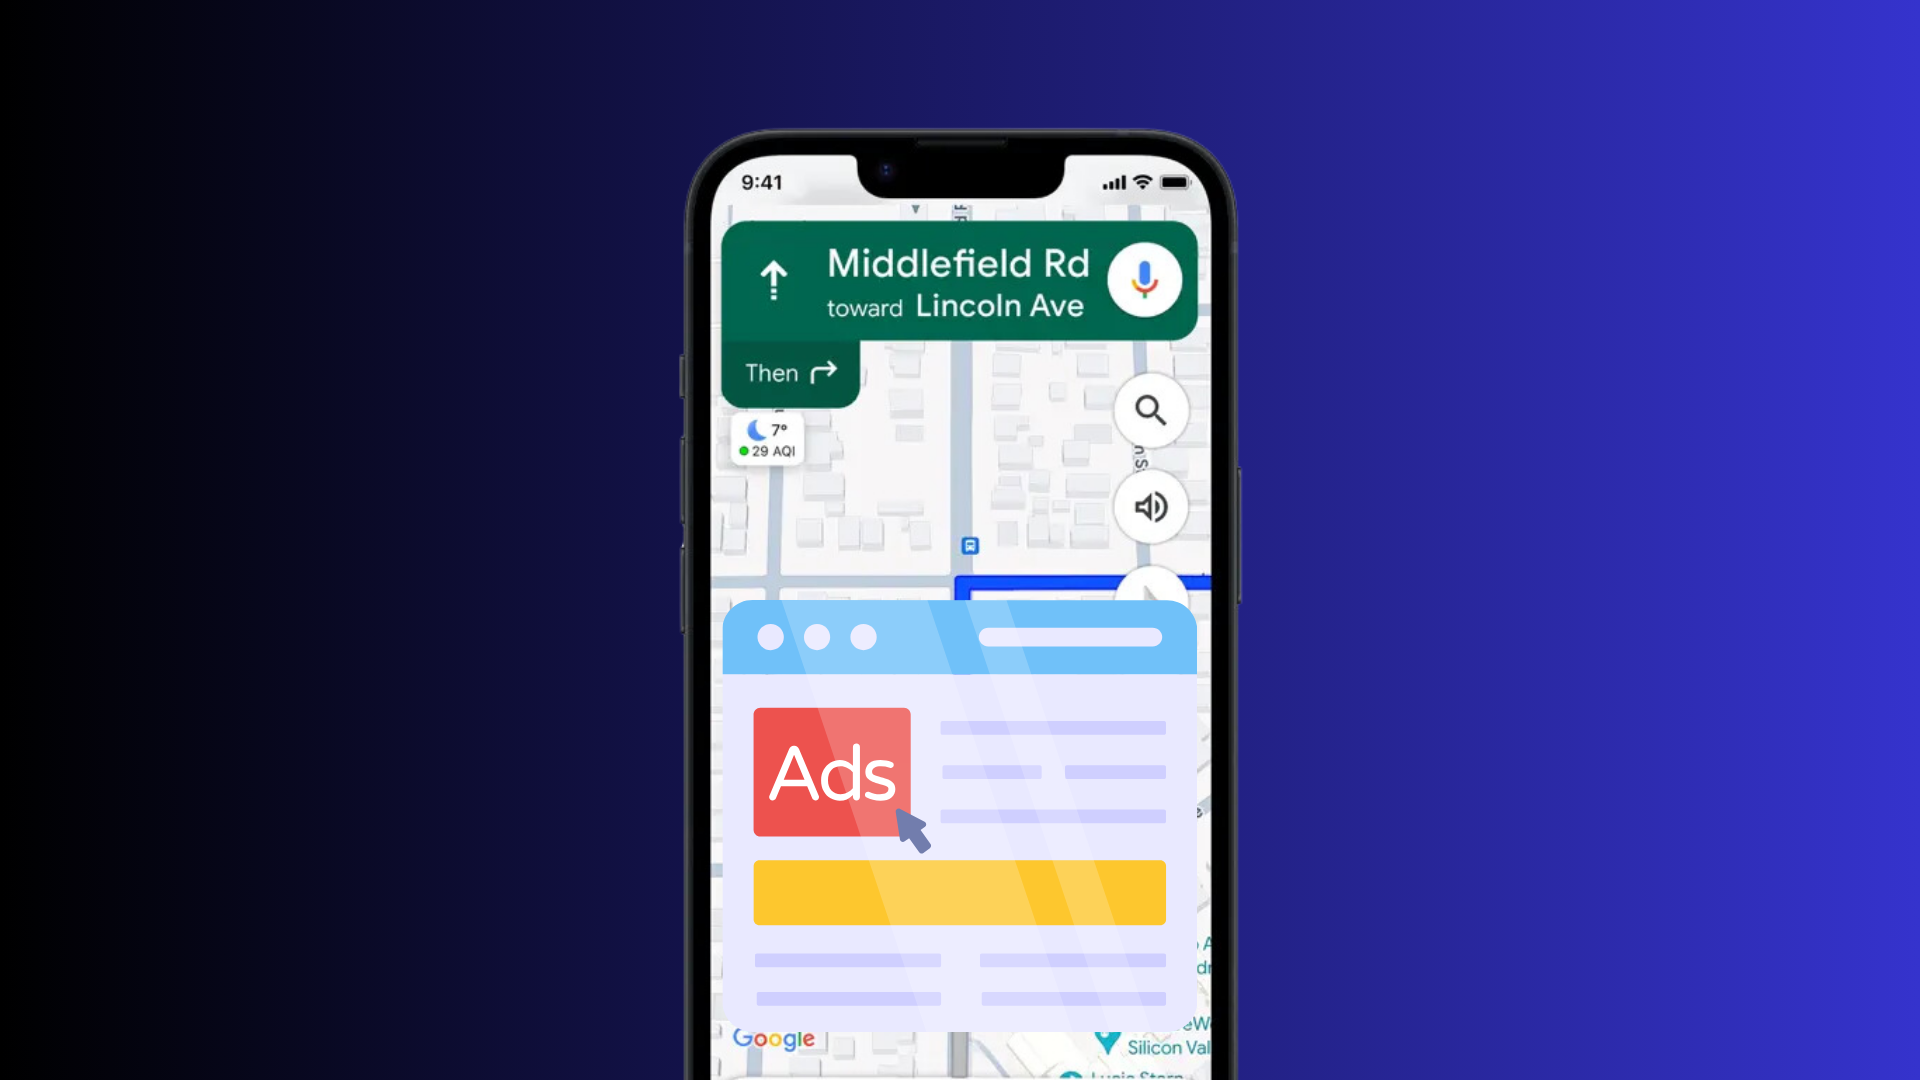 Your Law Firm's Local Service Ads Will Appear on Google Maps for iOS